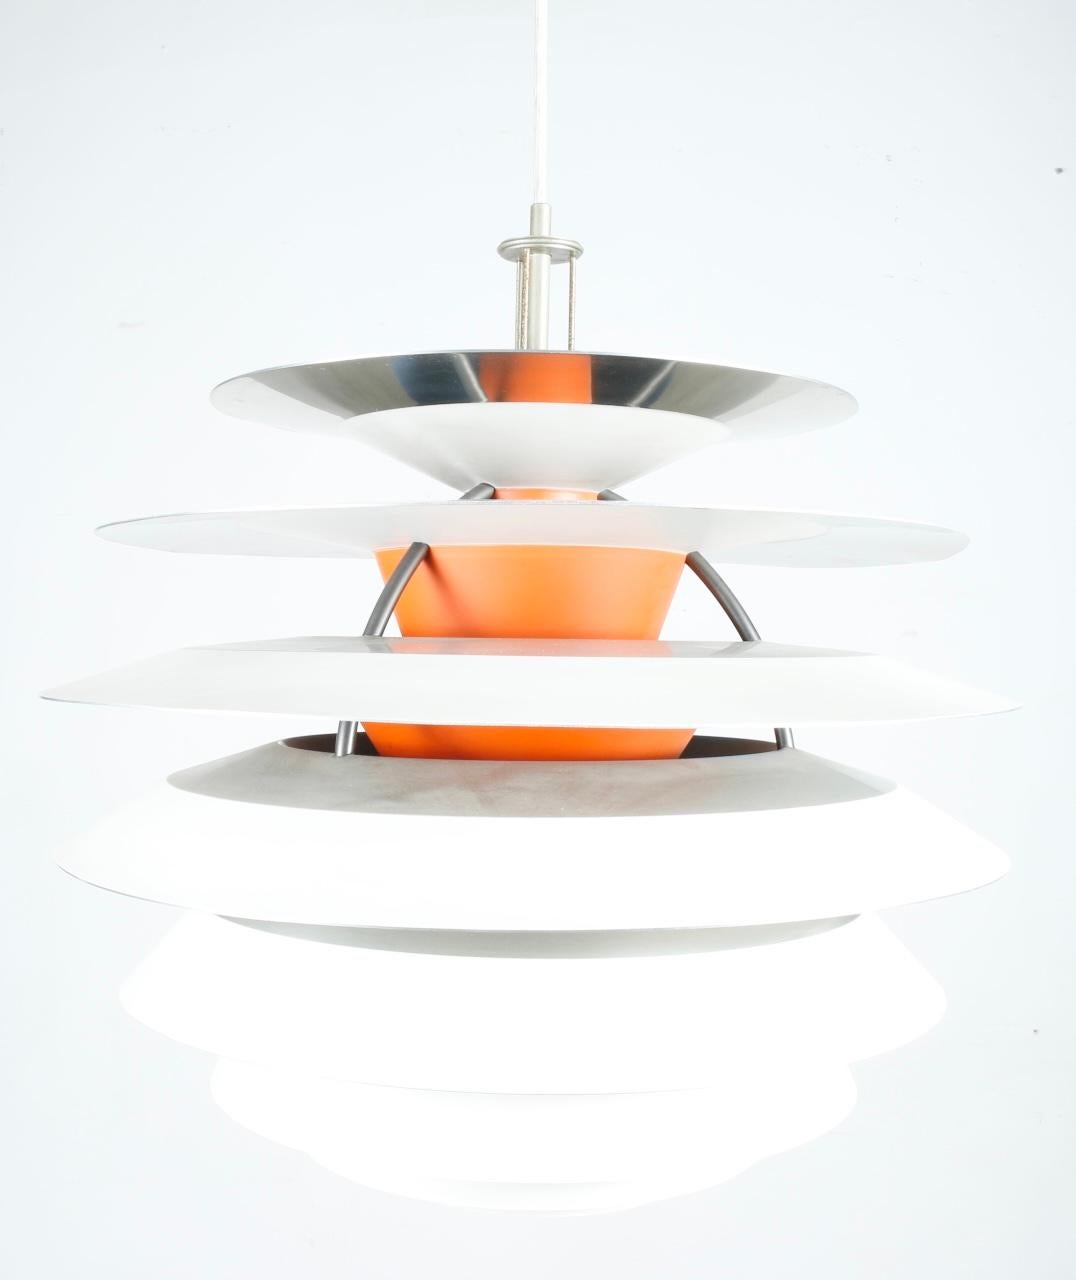 Unique beautiful vintage Aluminum pendent light with orange fixture, Great design and style. No canopy included. This light also has chrome accent. Works perfectly.